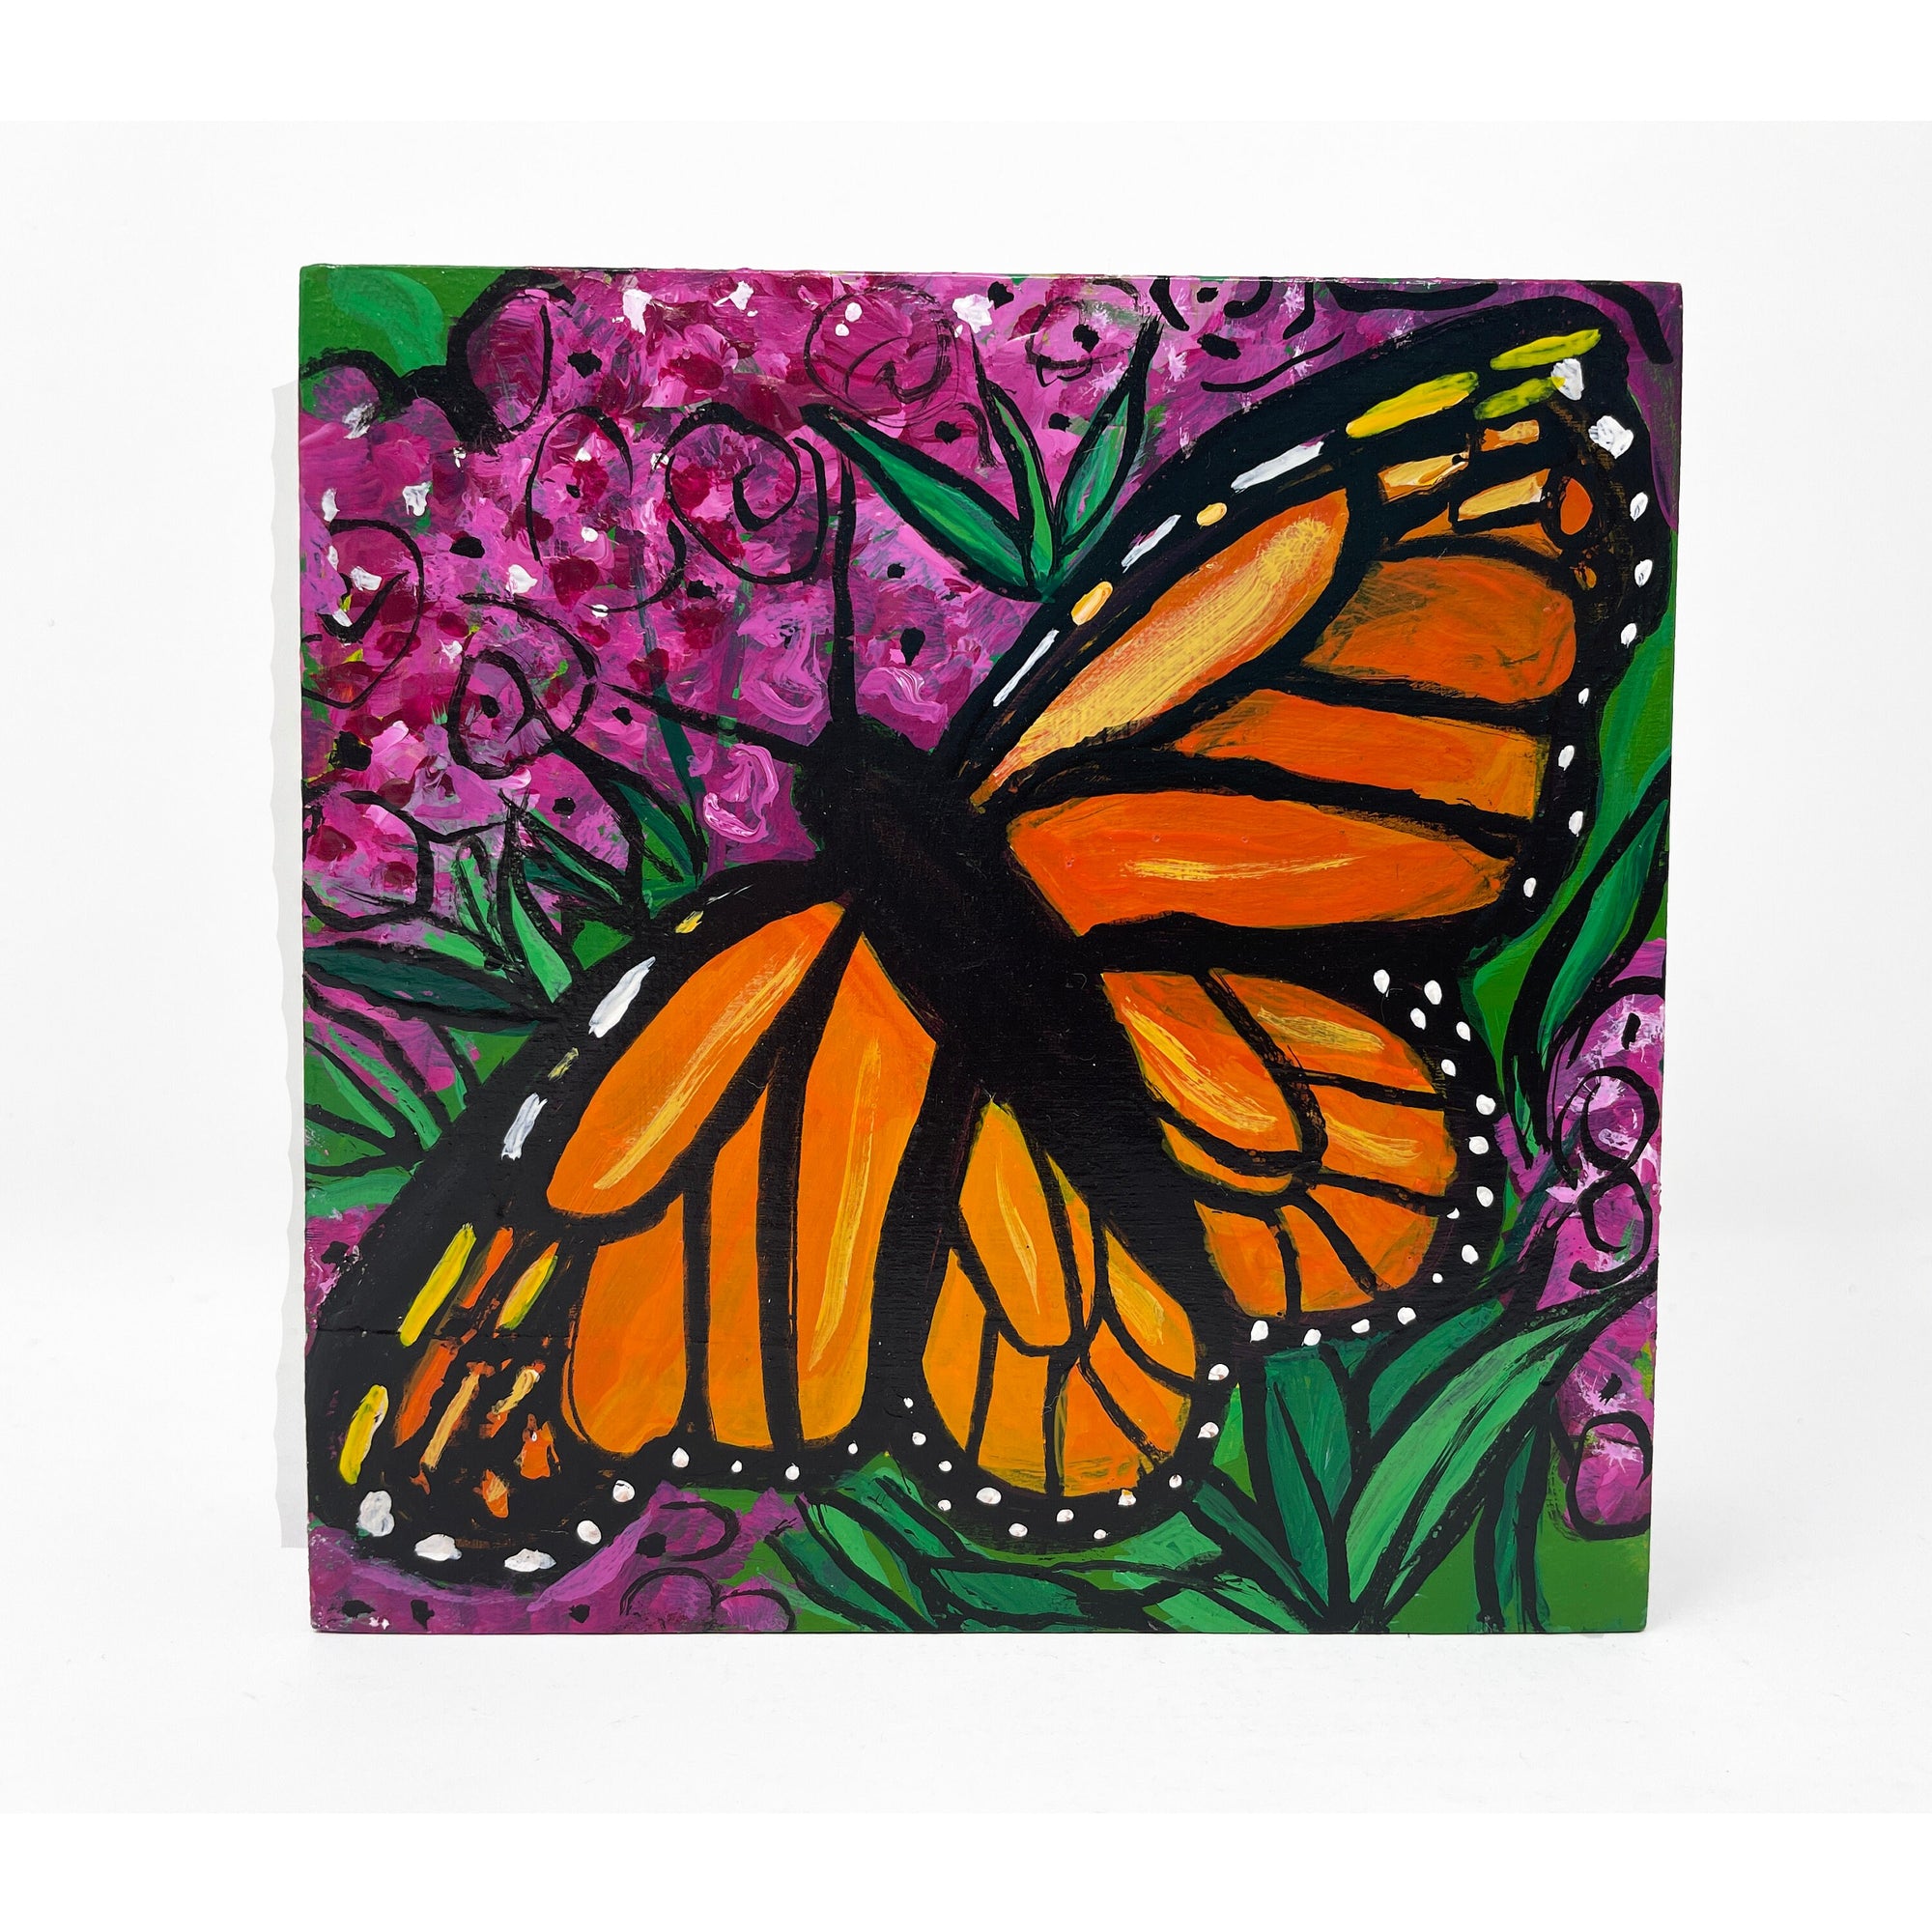 Monarch Butterfly Painting - Butterfly on Pink Milkweed Plant - Small Square Painting - 5x5 Inches - Ready to Hang